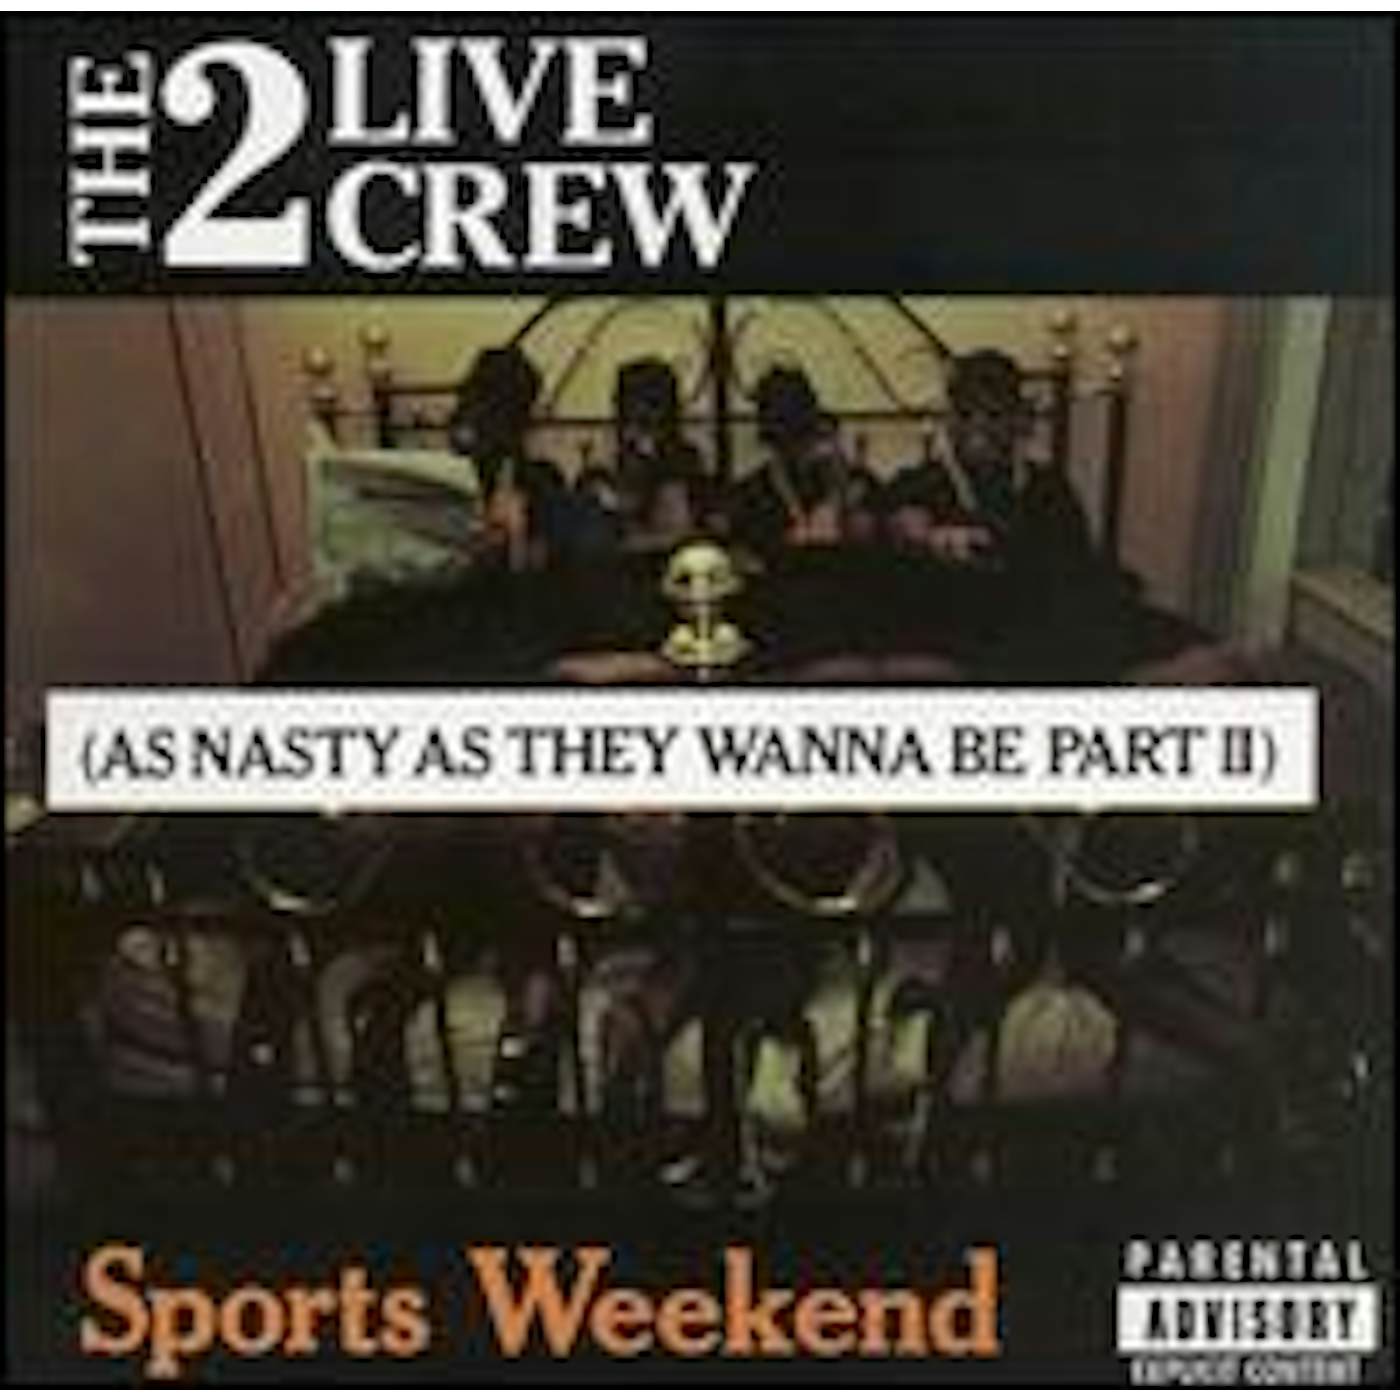 2 LIVE CREW SPORTS WEEKEND CD